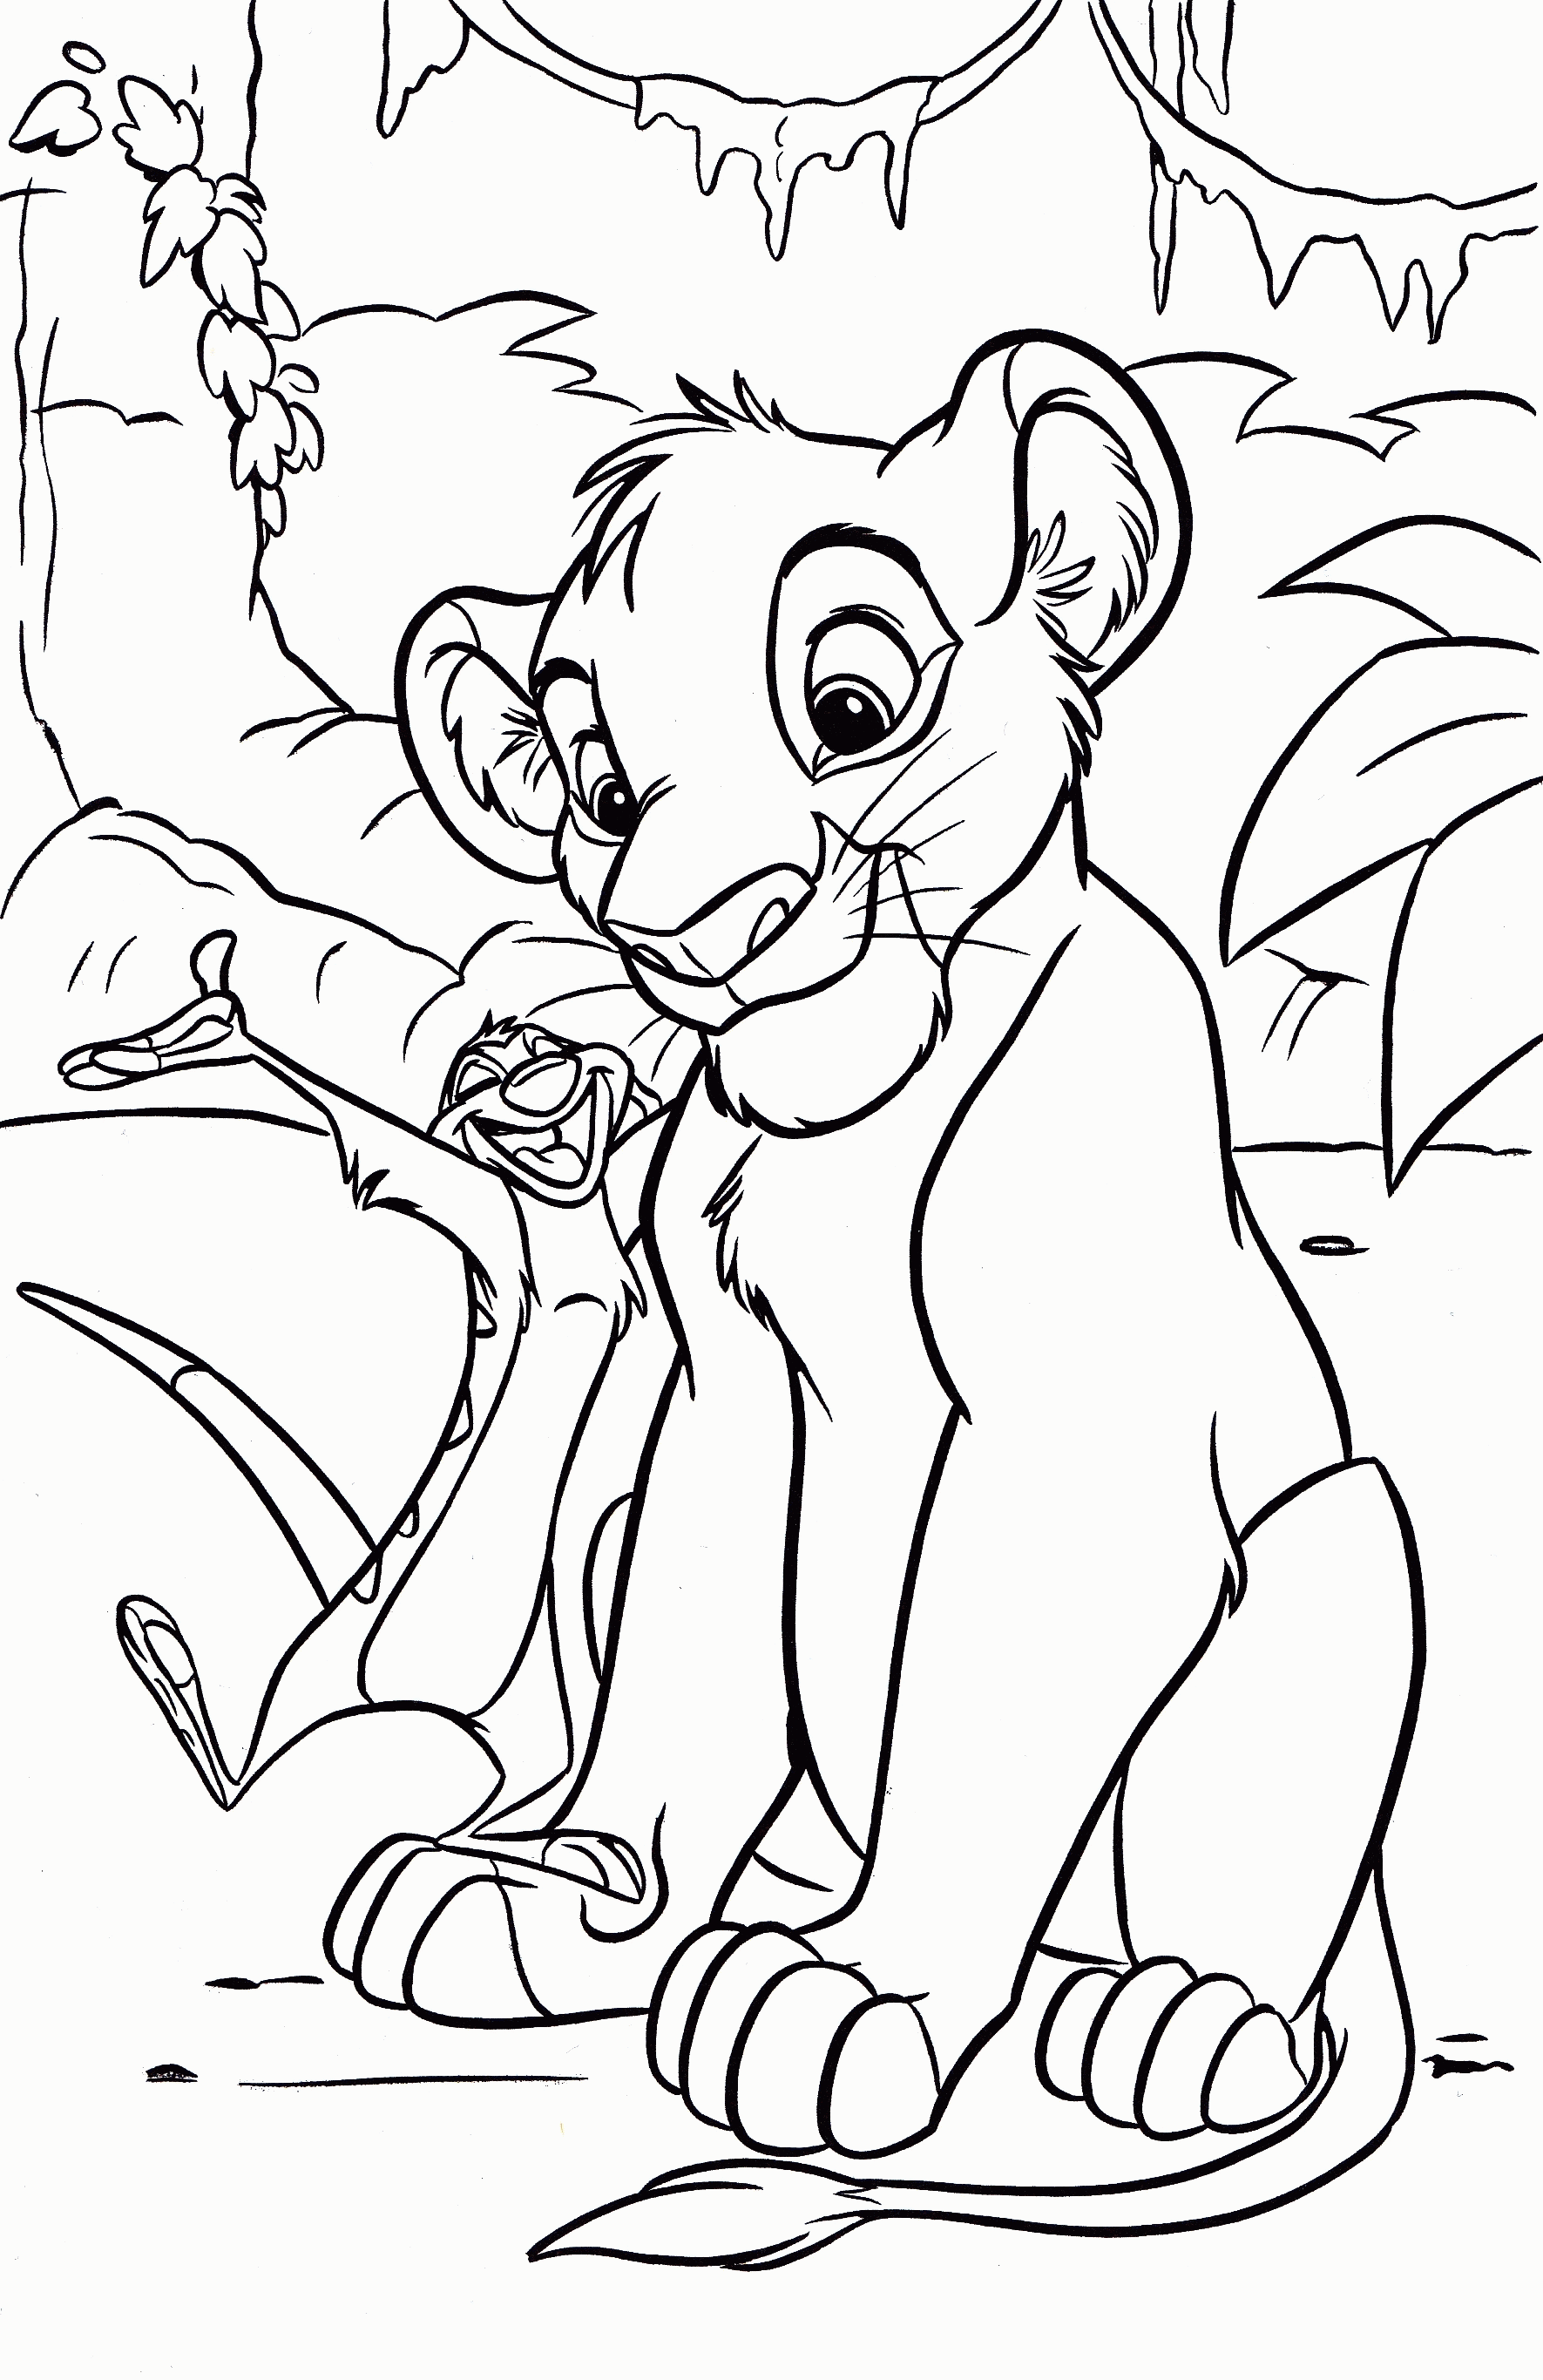 Walt Disney World Coloring Pages Free - Coloring Home